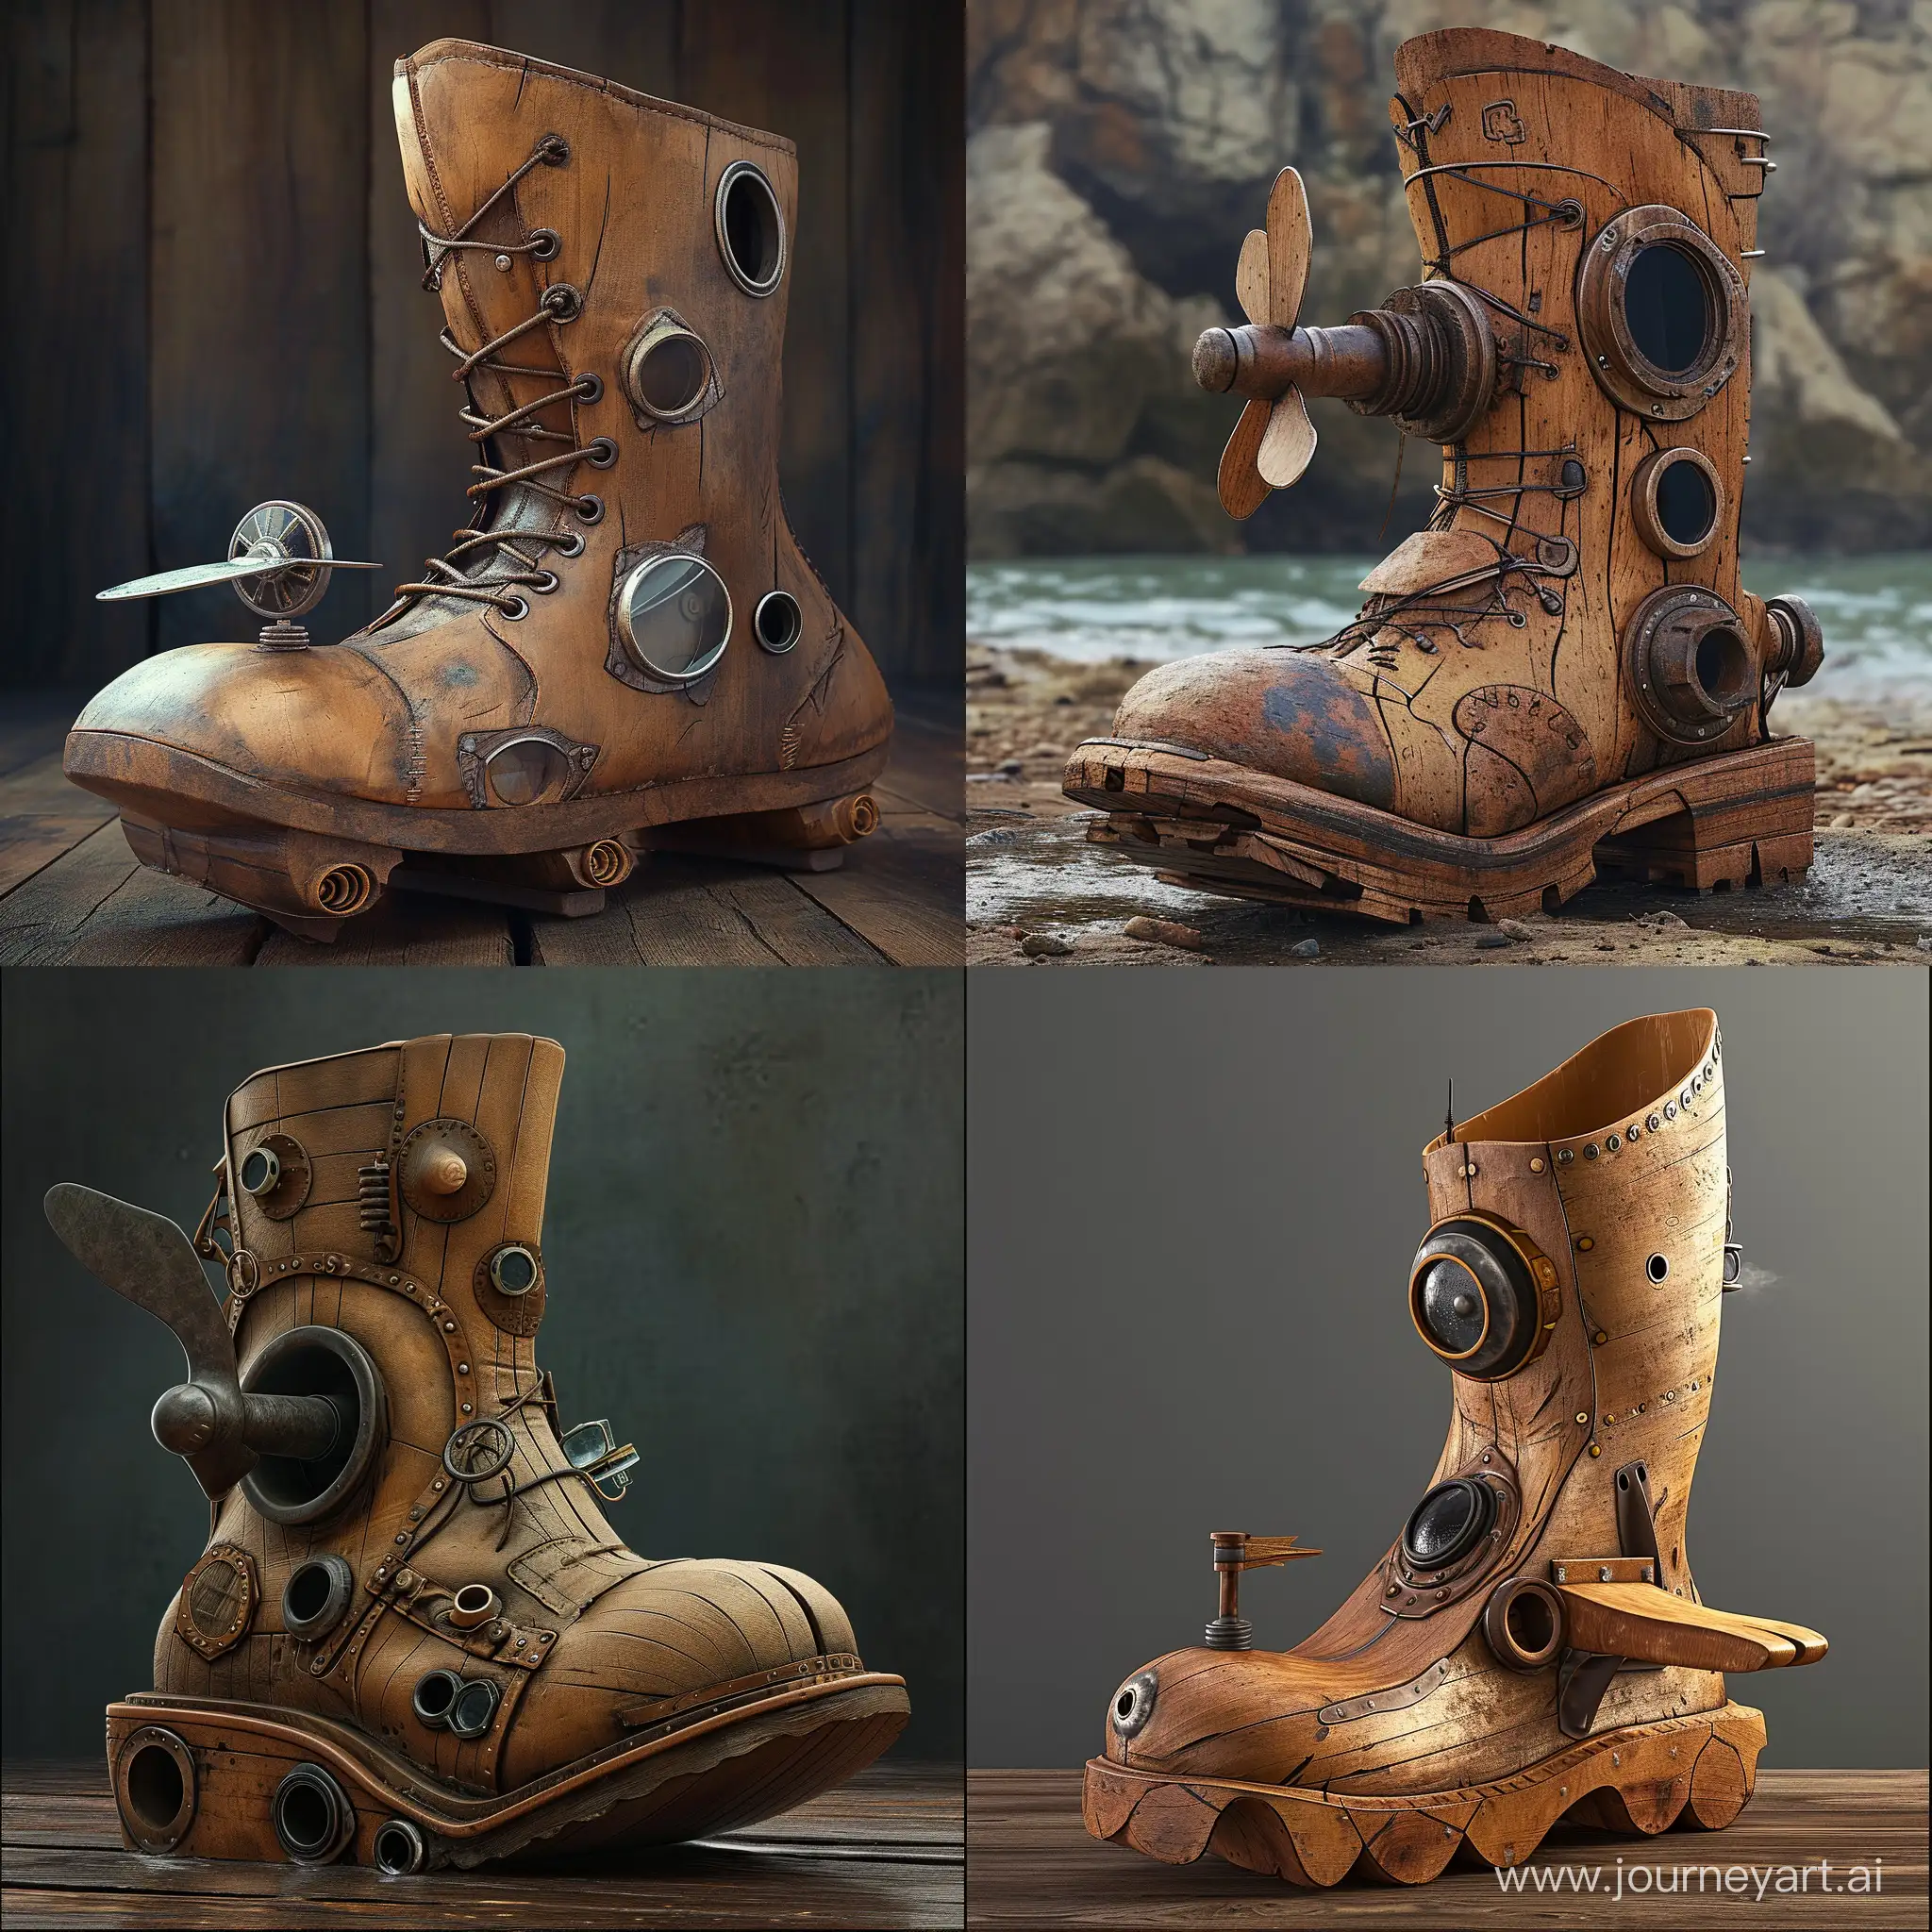 Epic-Wooden-Submarine-Boot-Giants-Marvel-Beneath-the-Waves